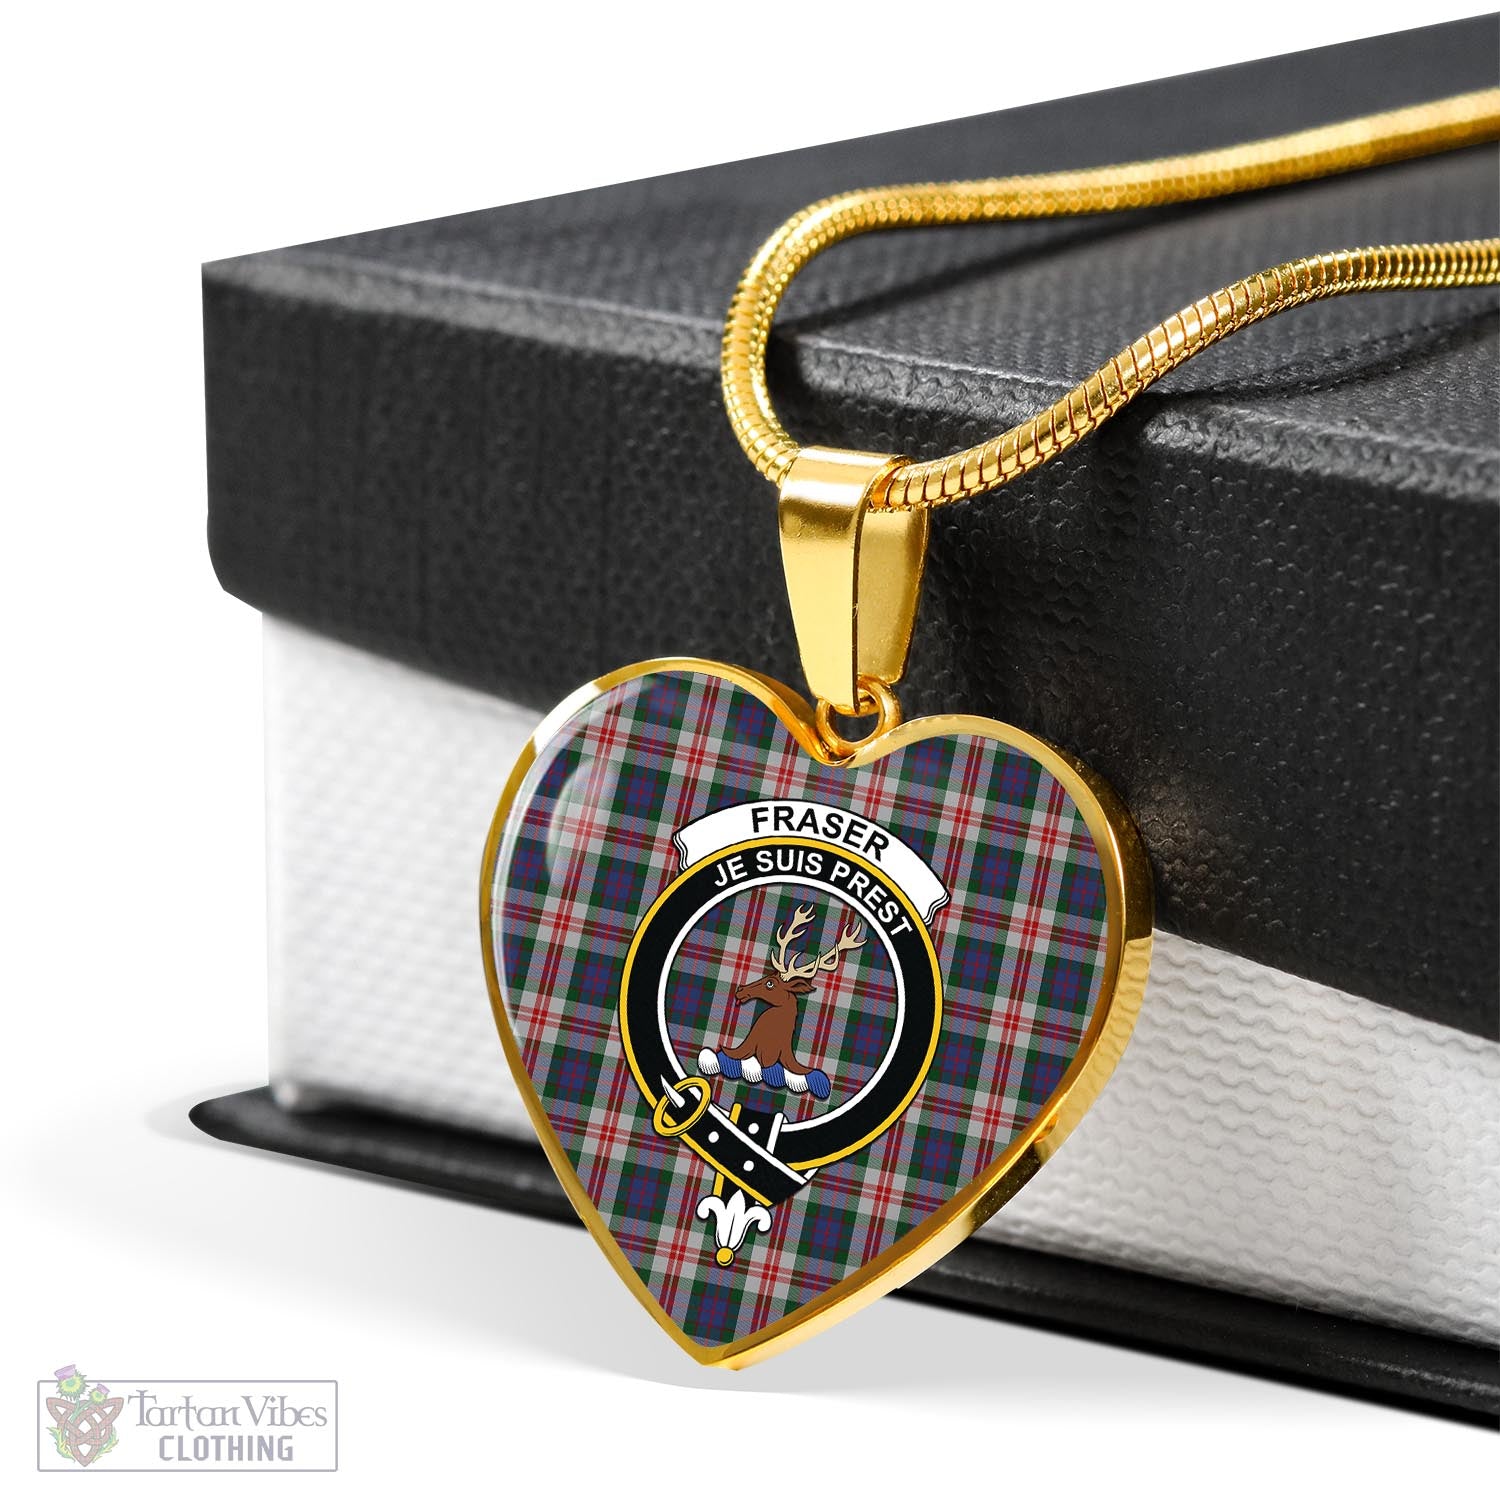 Tartan Vibes Clothing Fraser Red Dress Tartan Heart Necklace with Family Crest